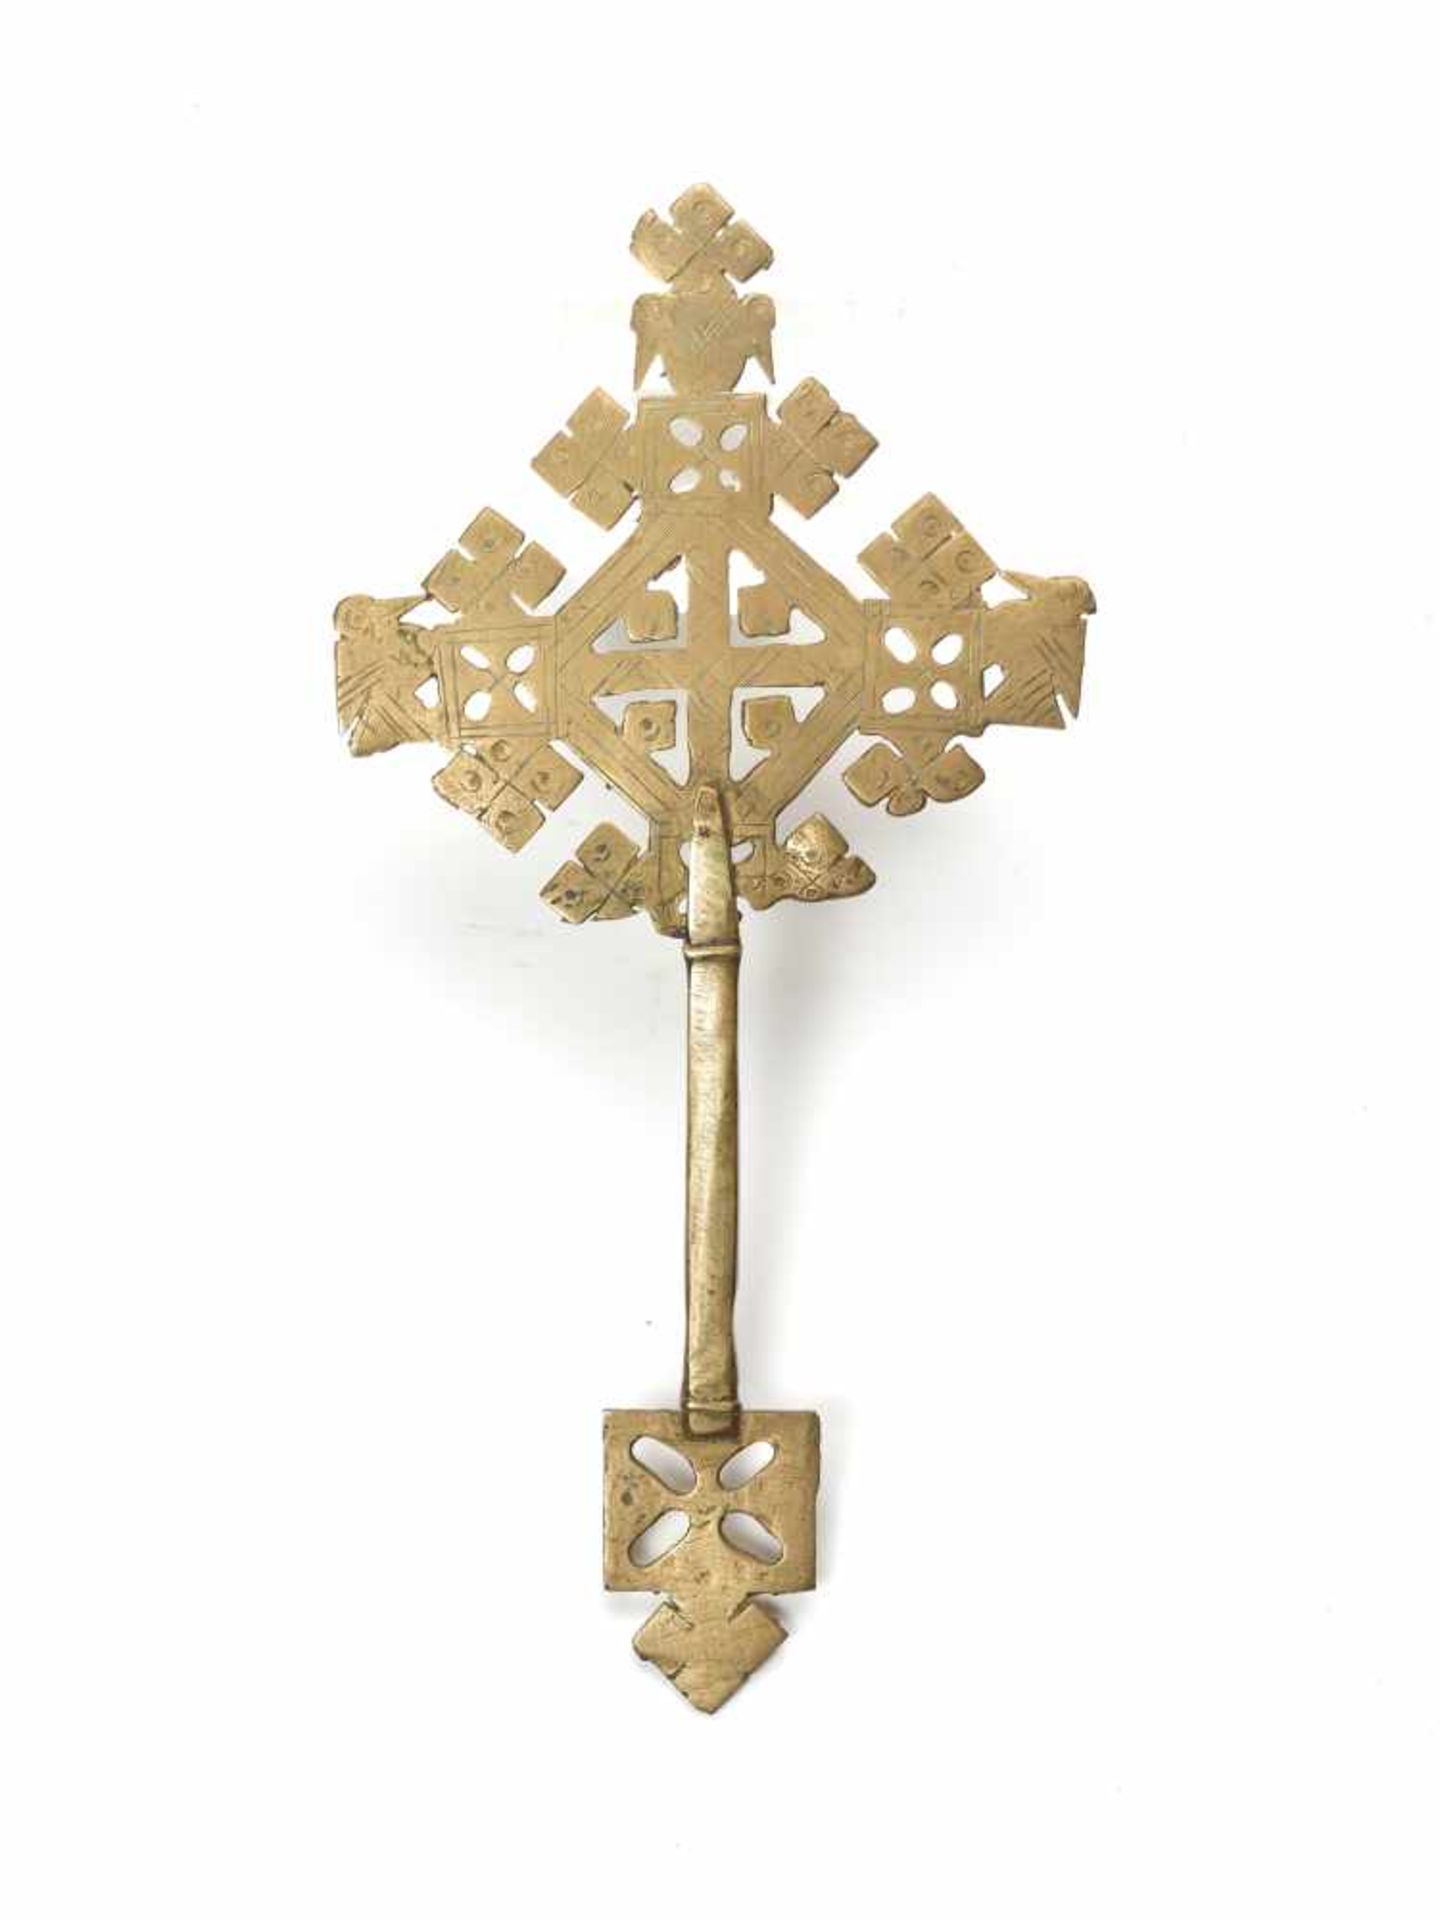 AN ETHIOPIAN PROCESSIONAL CROSS, CHASED AND OPENWORKED BRASS, 19TH CENTURYBrassEthiopia, late 19th